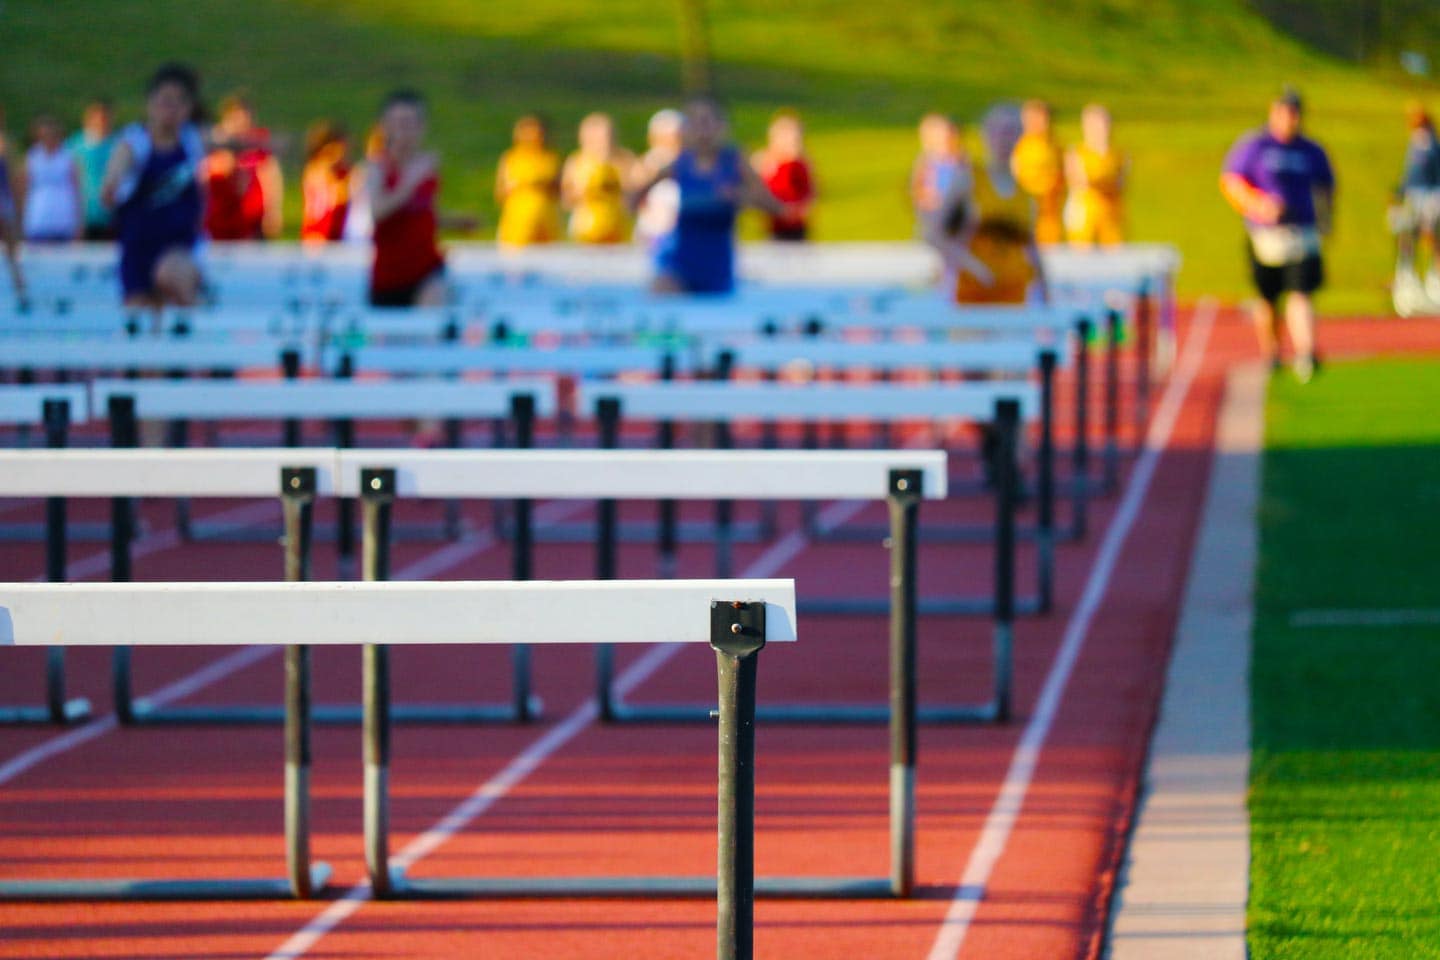 are hurdles in your life holding you back